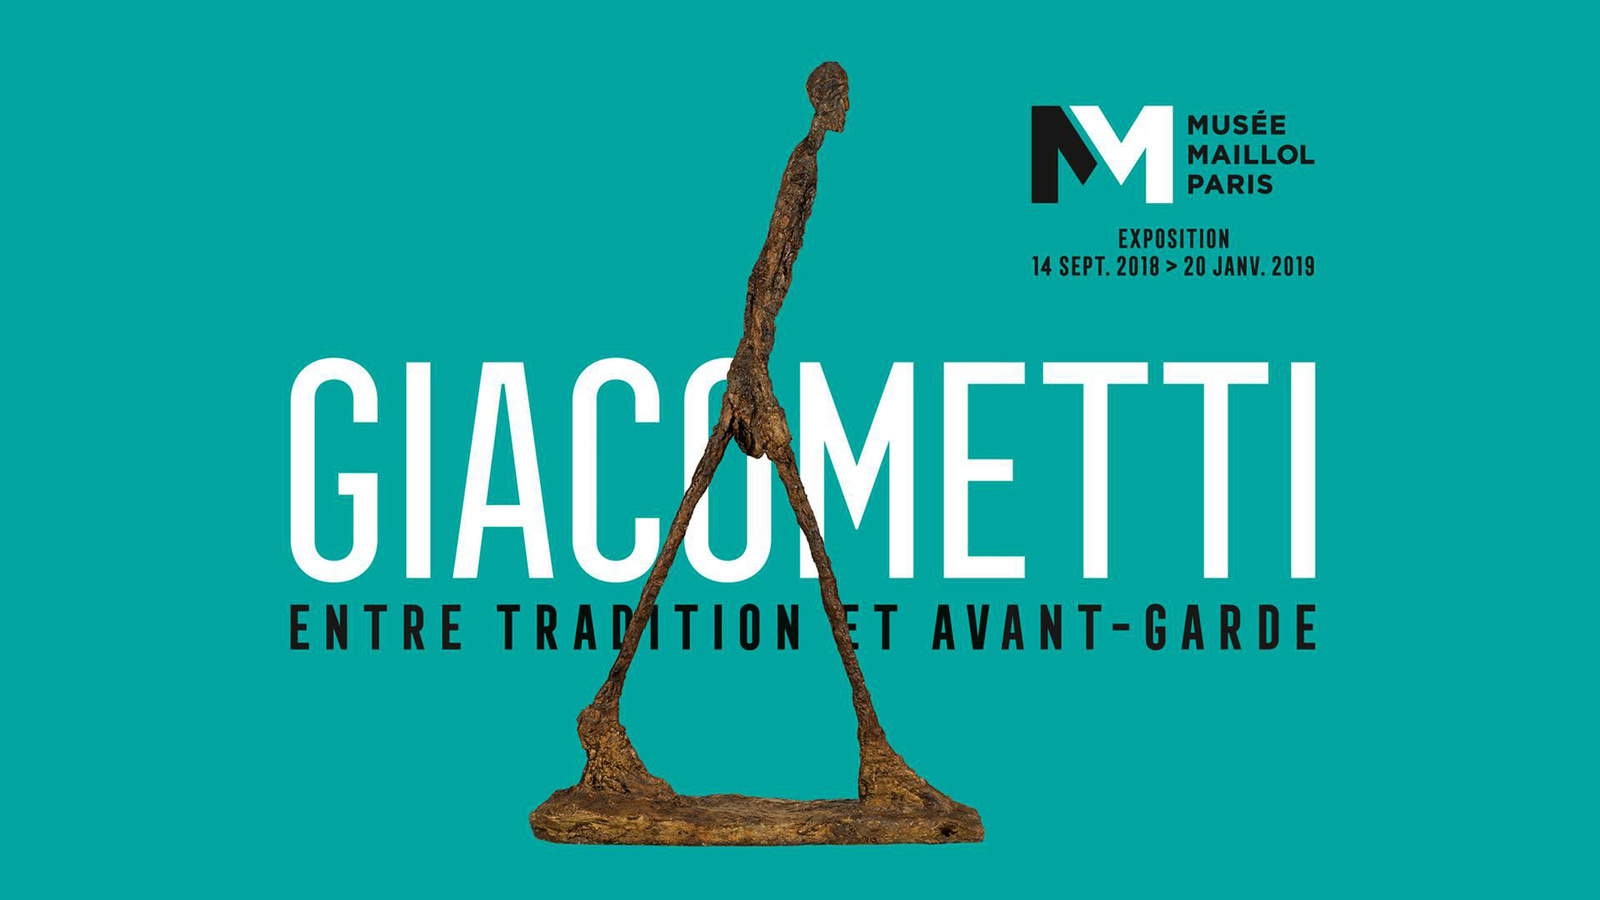 Giacometti, between tradition and avant-garde